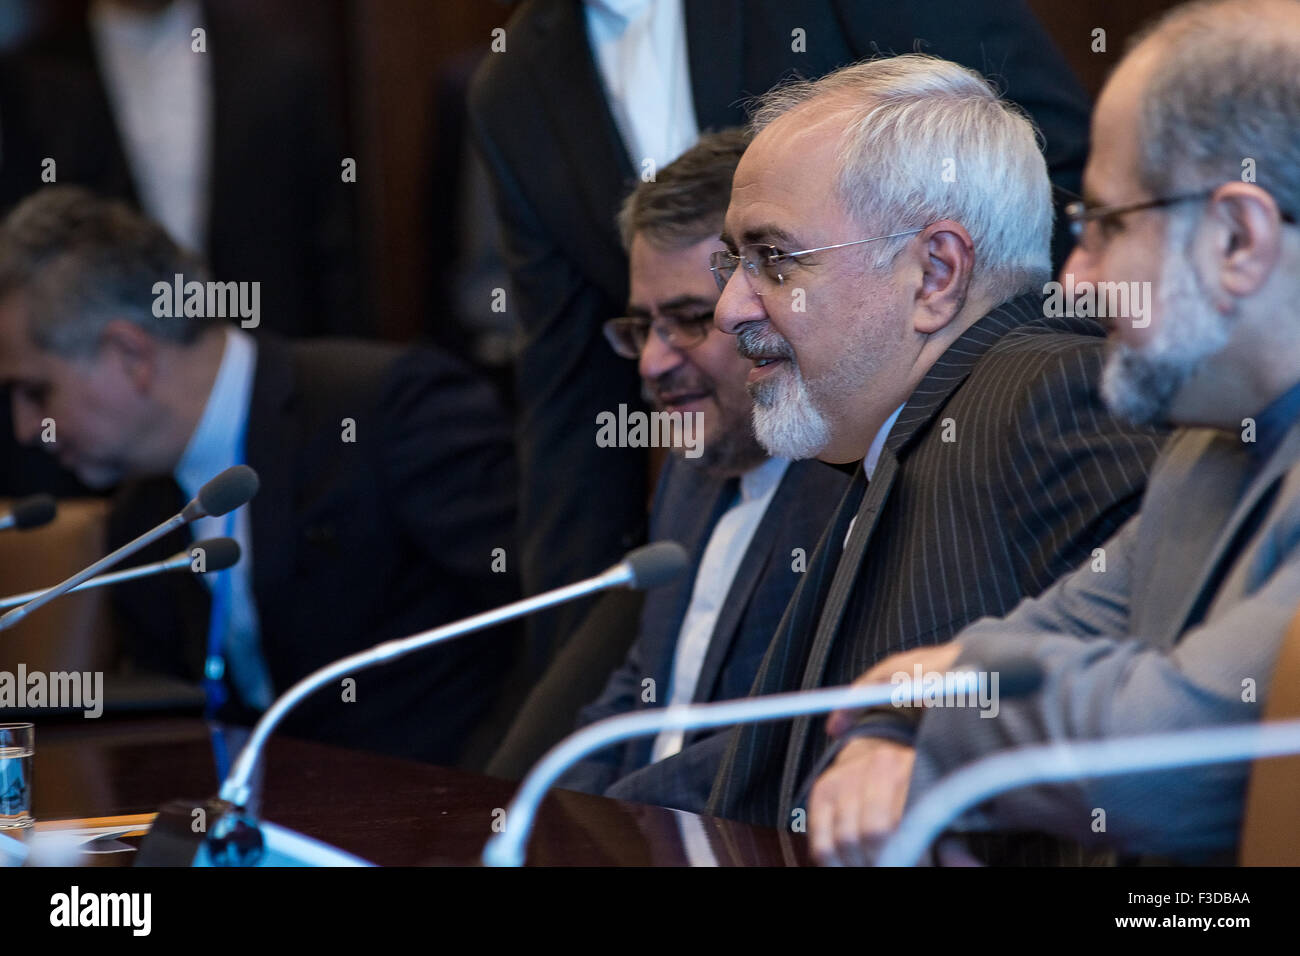 New York, United States. 05th Oct, 2015. Iranian Foreign Minister Javad Zarif sits at the Secretary-General's conference table. Secretary-General Ban Ki-moon greets Iranian Foreign Minister Javad Zarif. © Albin Lohr-Jones/Pacific Press/Alamy Live News Stock Photo